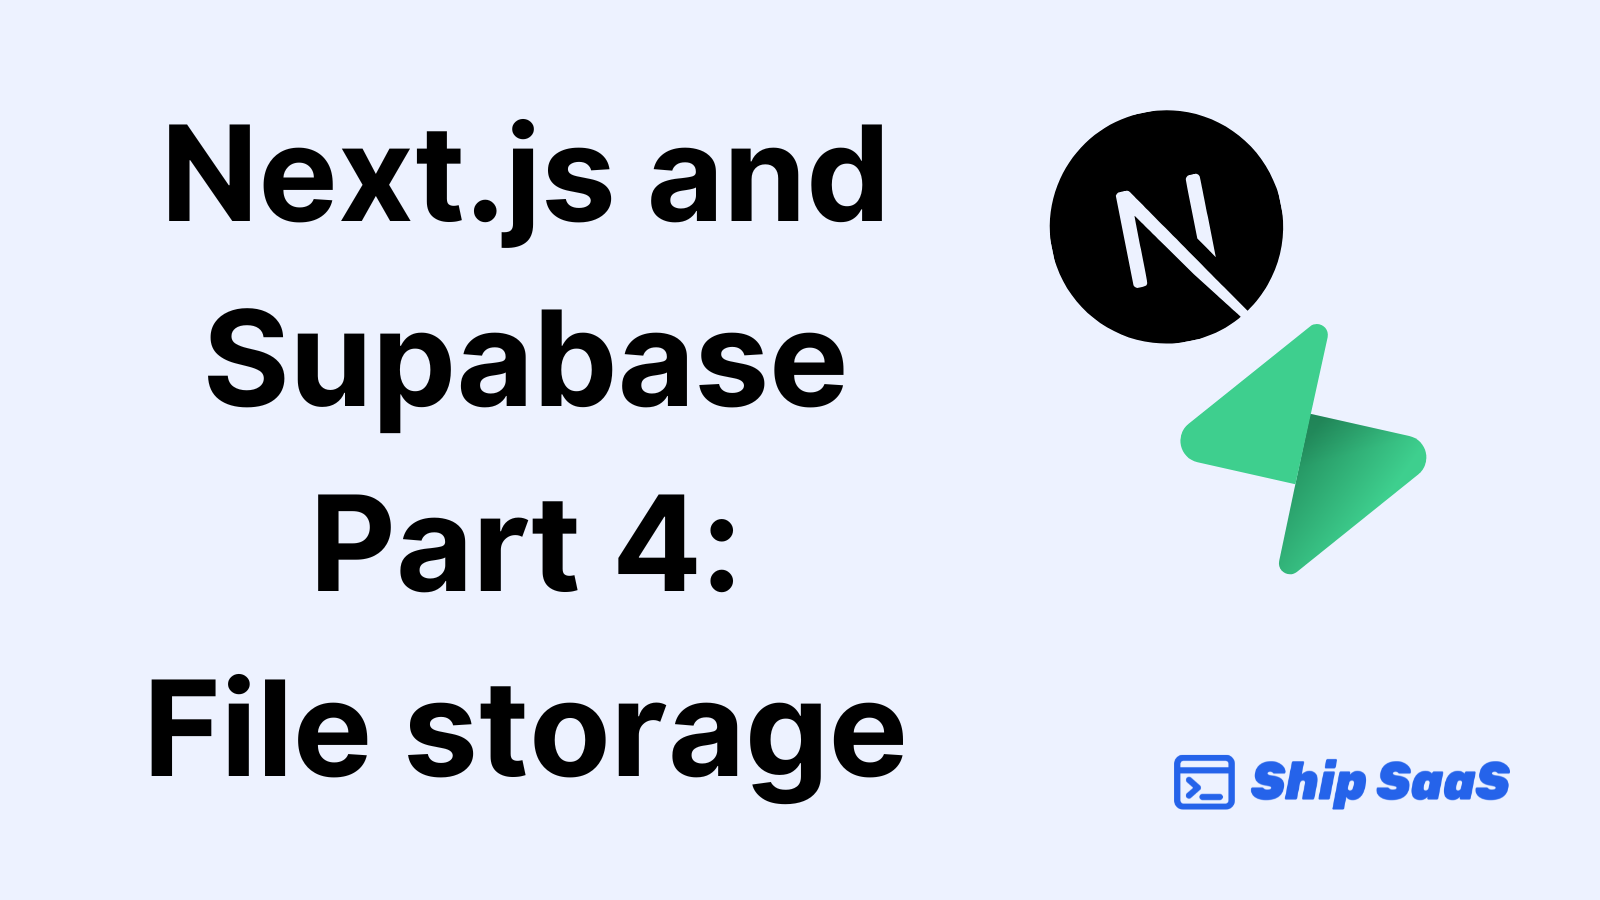 Get started with Next.js and Supabase - Part 4